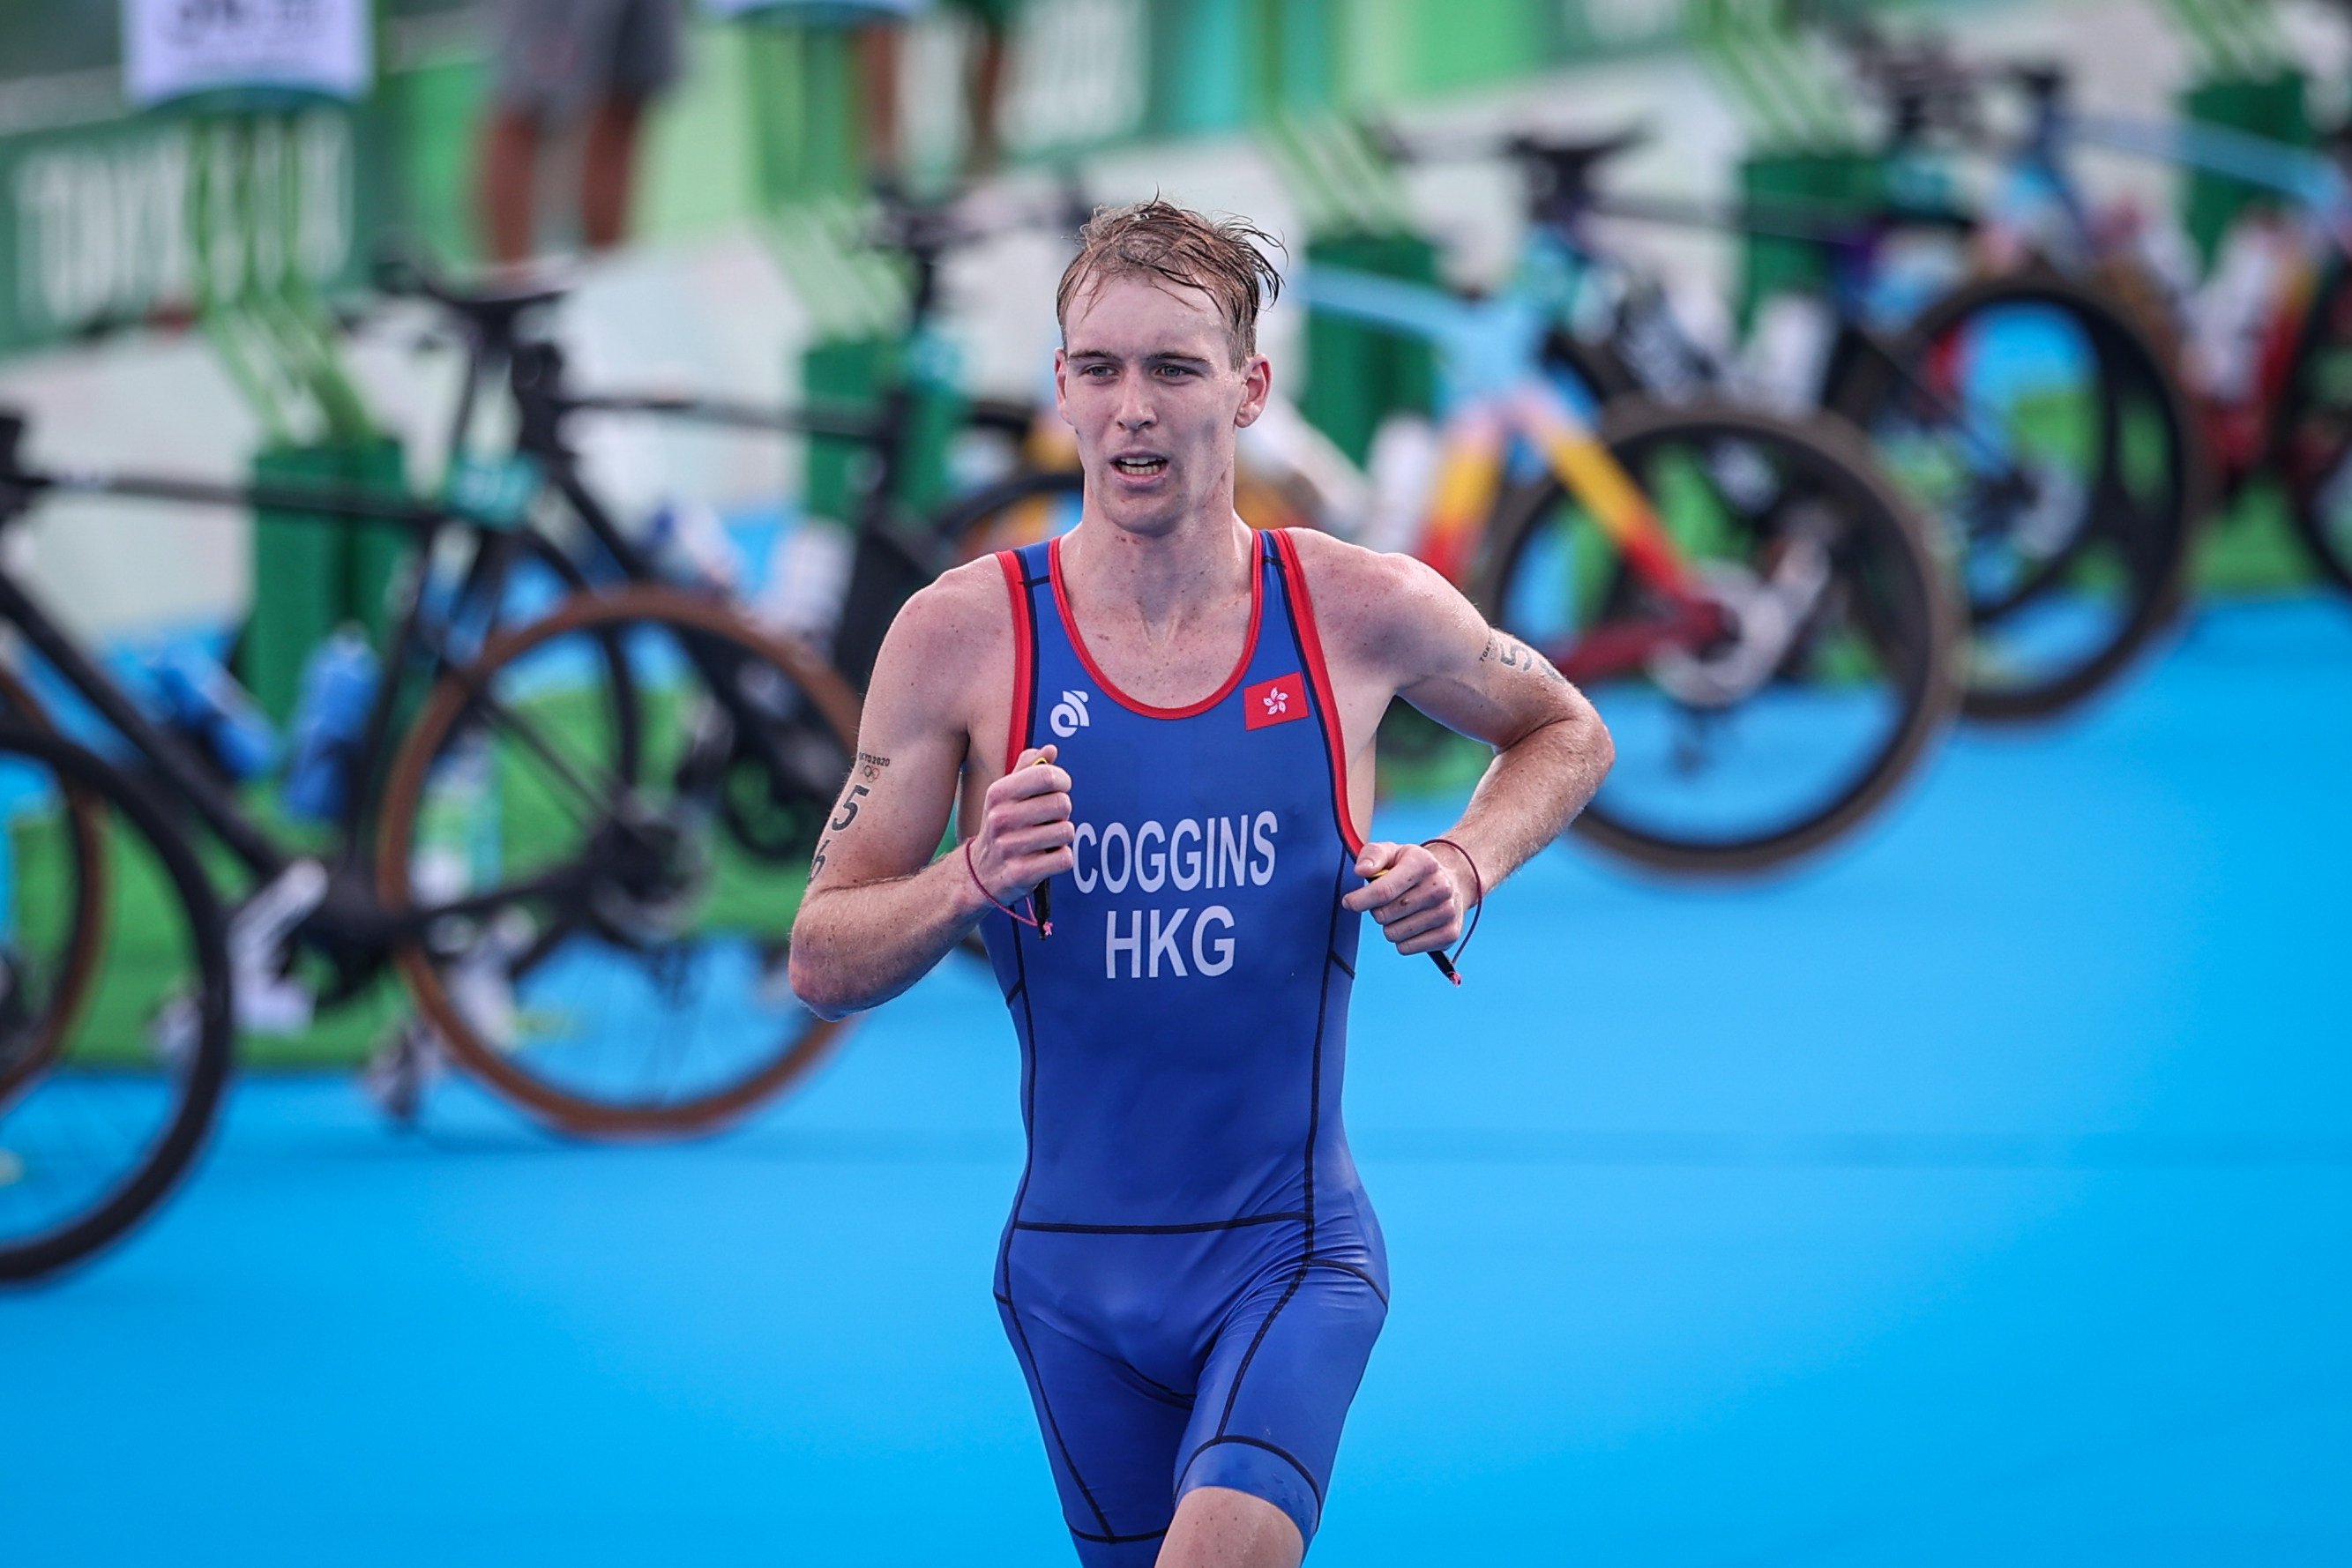 Oscar Coggins finished 33rd at the Tokyo Olympic Games, in 2021. Photo: Xinhua